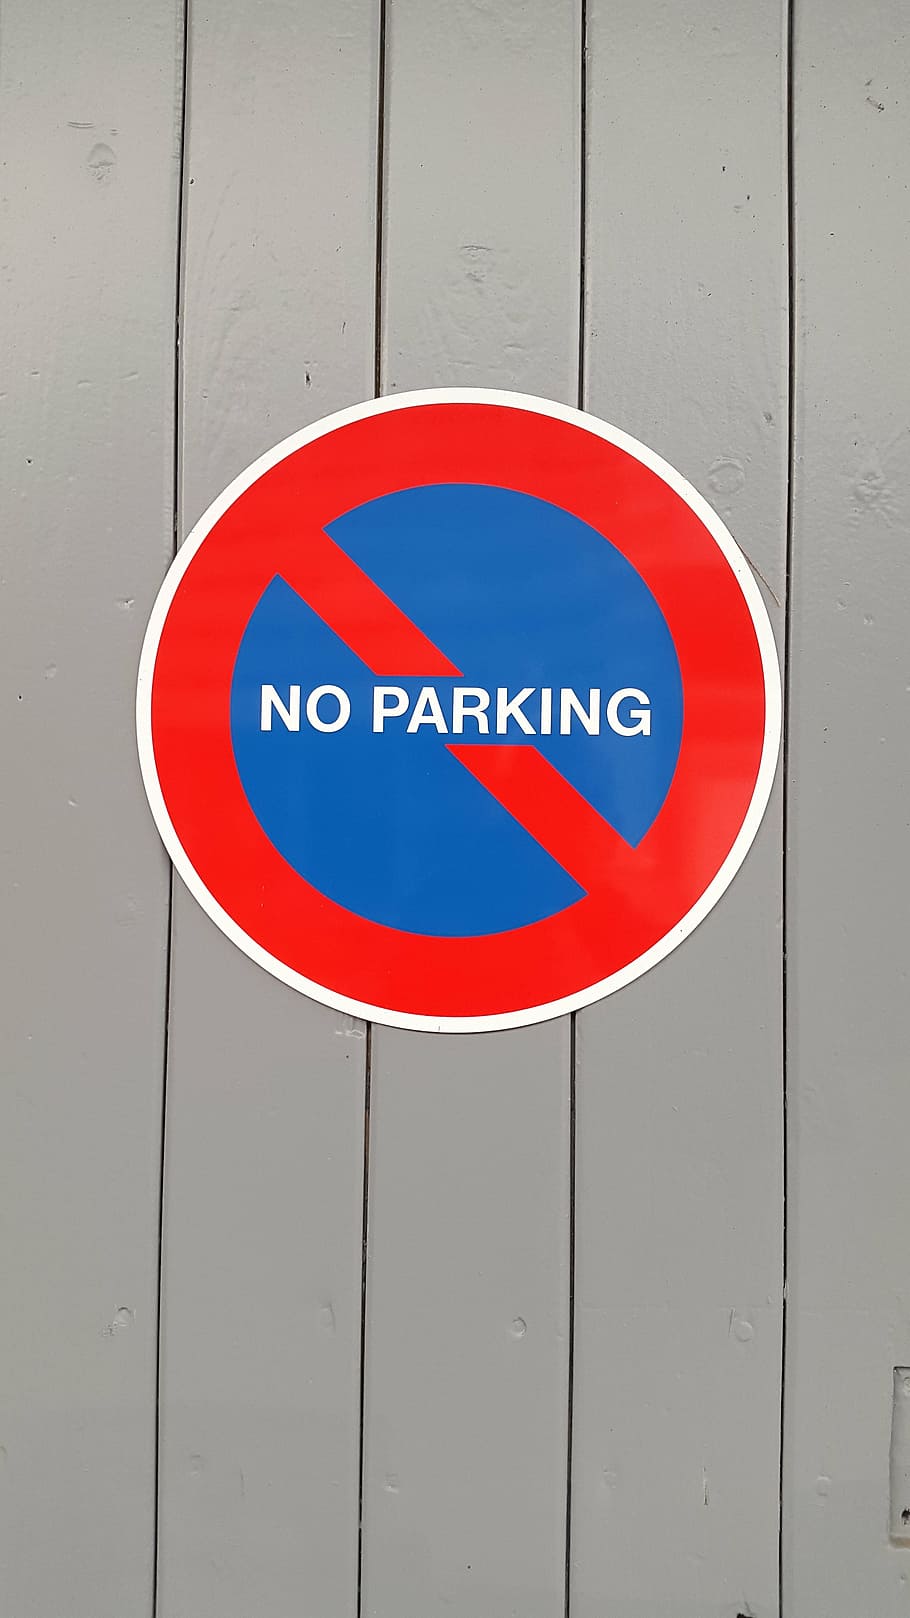 parking, shield, ban, park, road sign, traffic sign, traffic, street sign, road, note